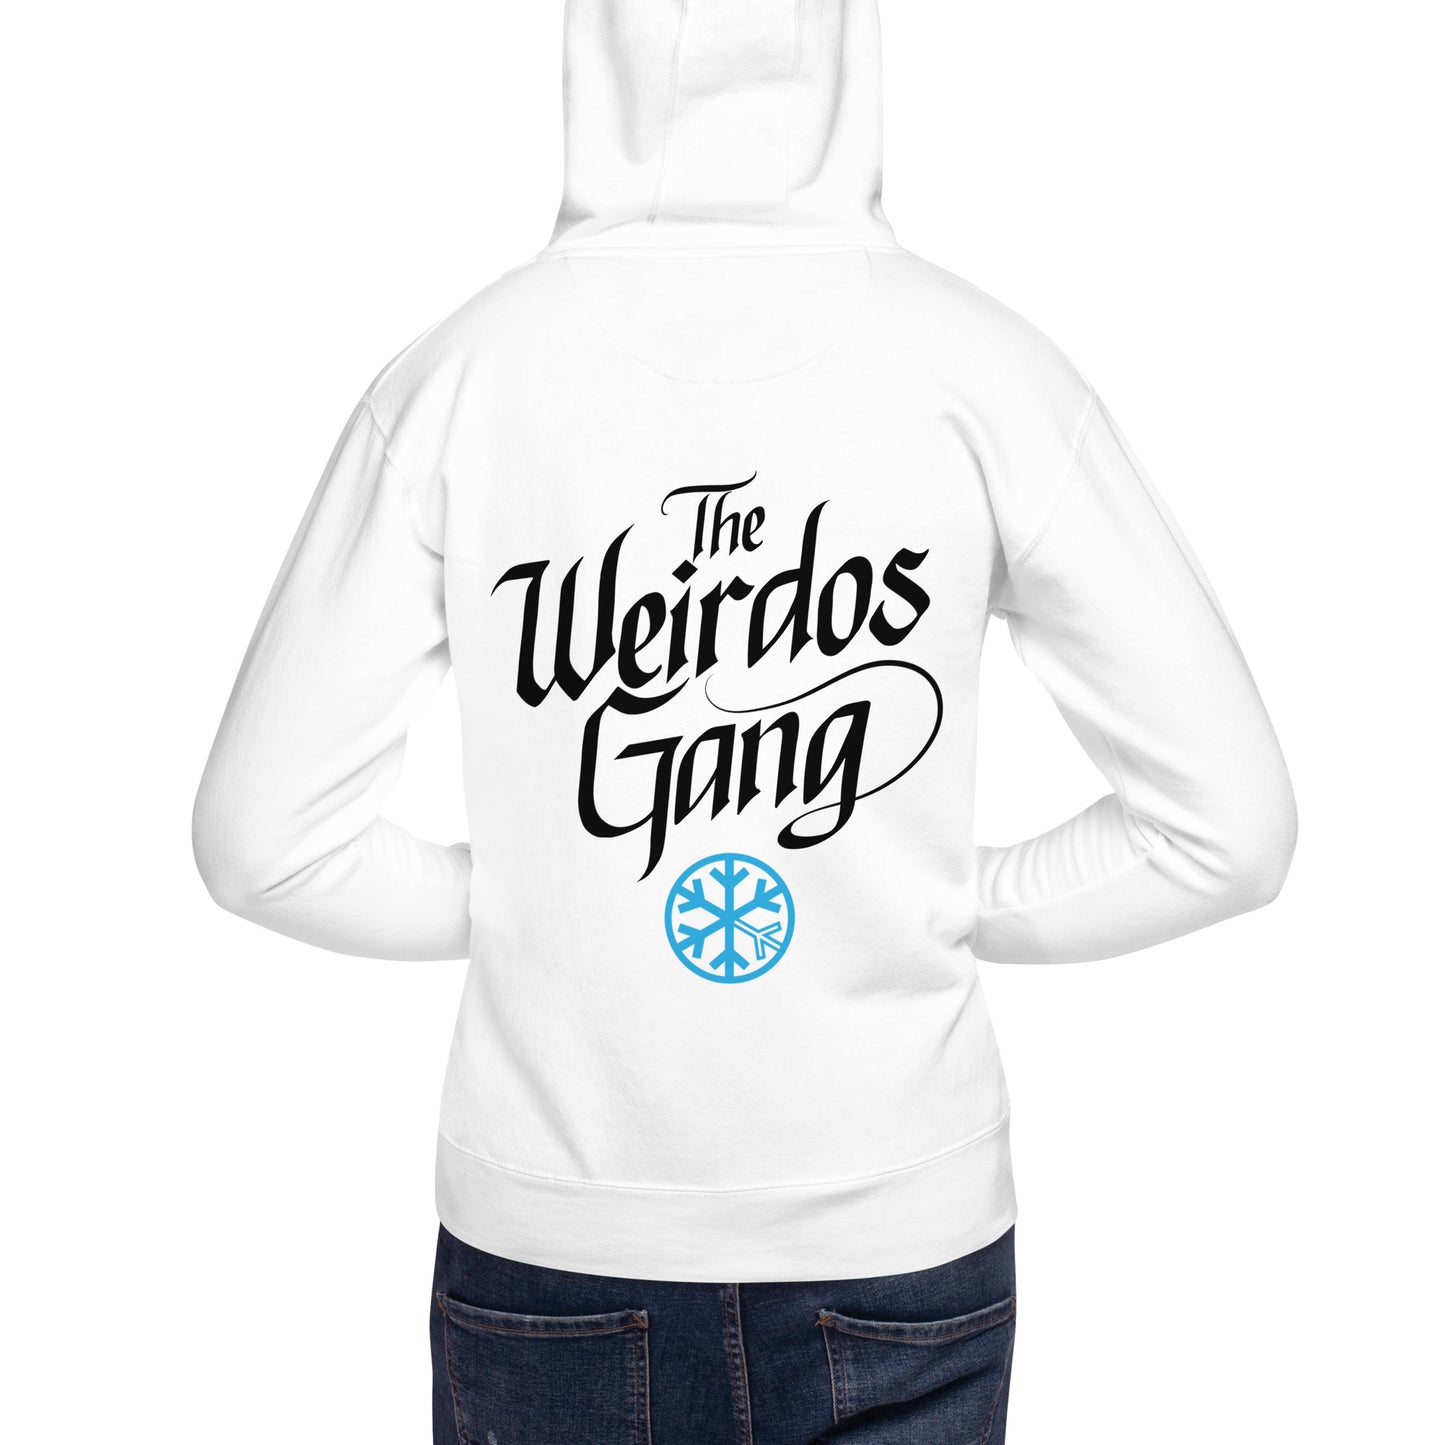 man back with Weirdos Gang lettering hoodie white by B.Different Clothing street art graffiti inspired brand for weirdos, outsiders, and misfits.